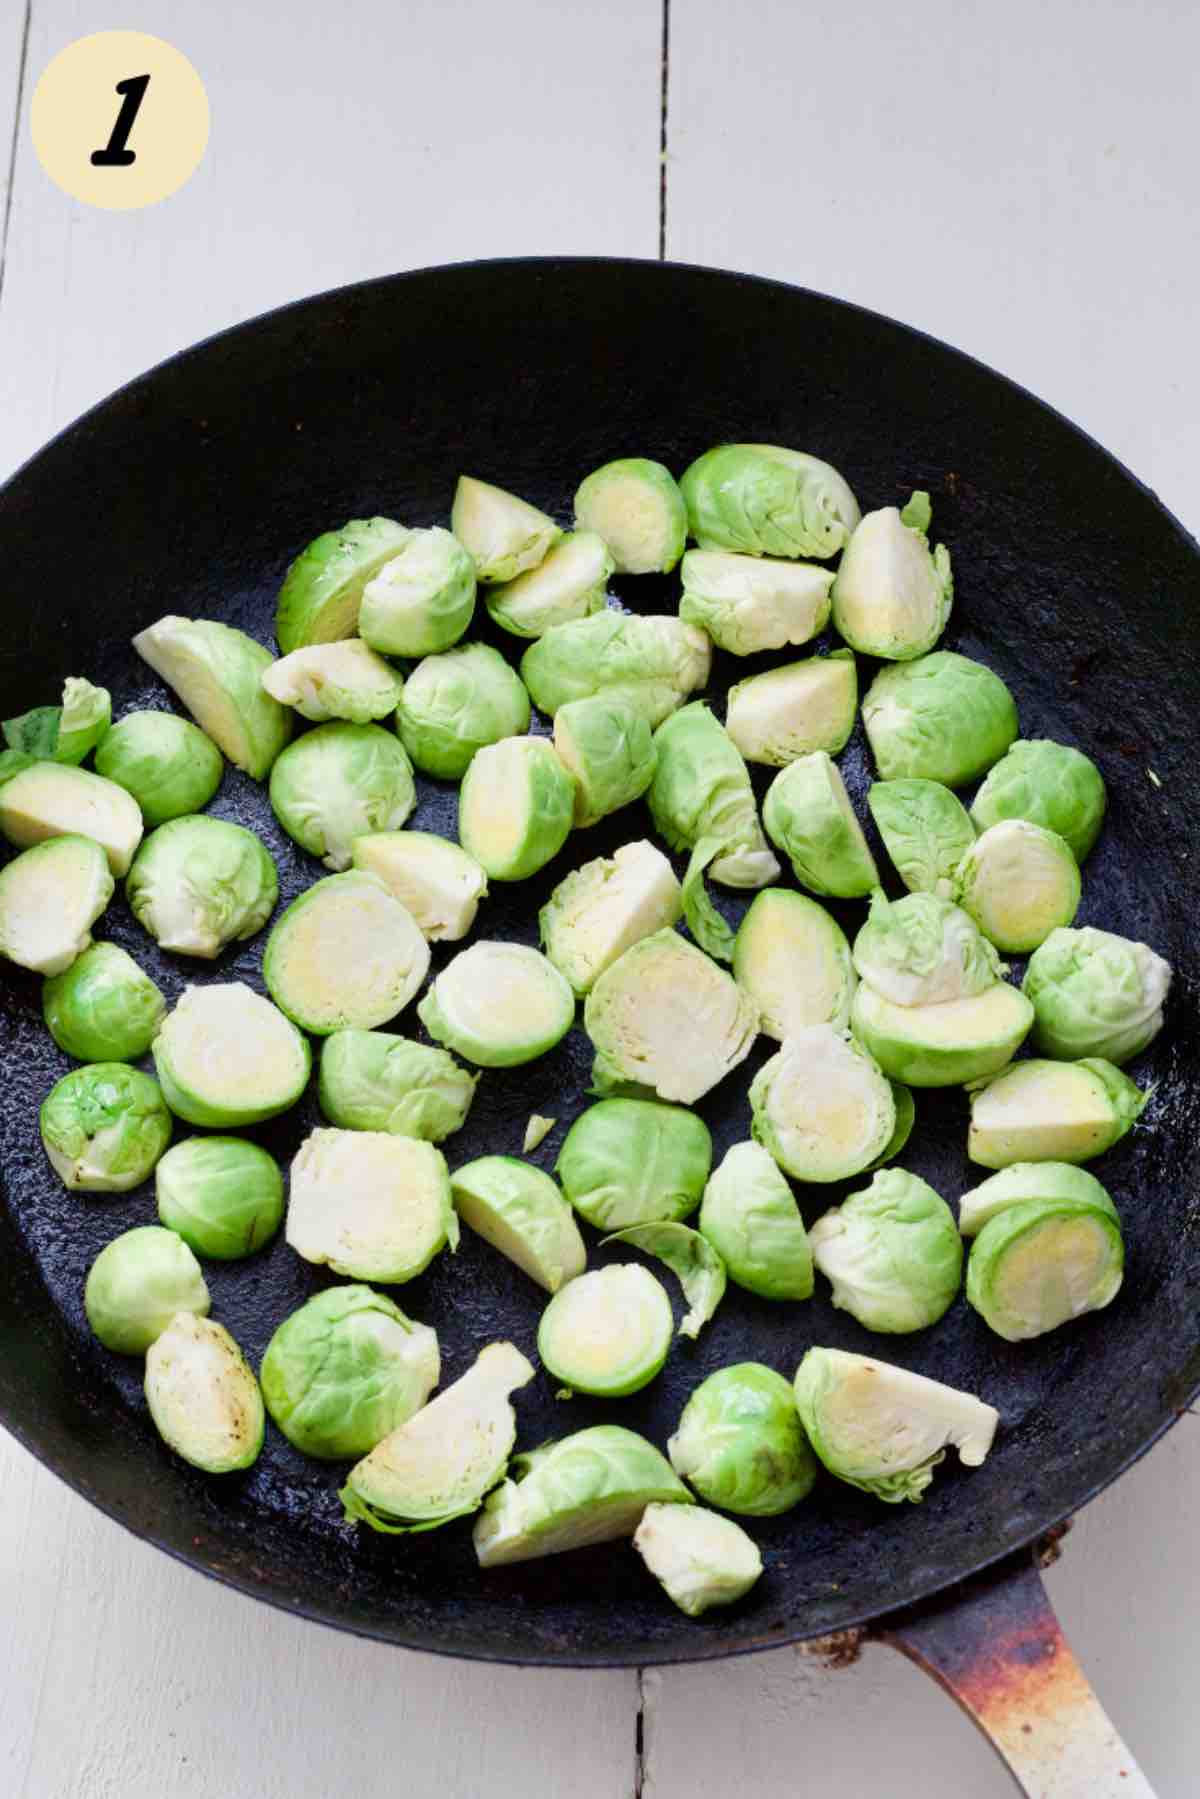 Pan frying Brussels sprouts.